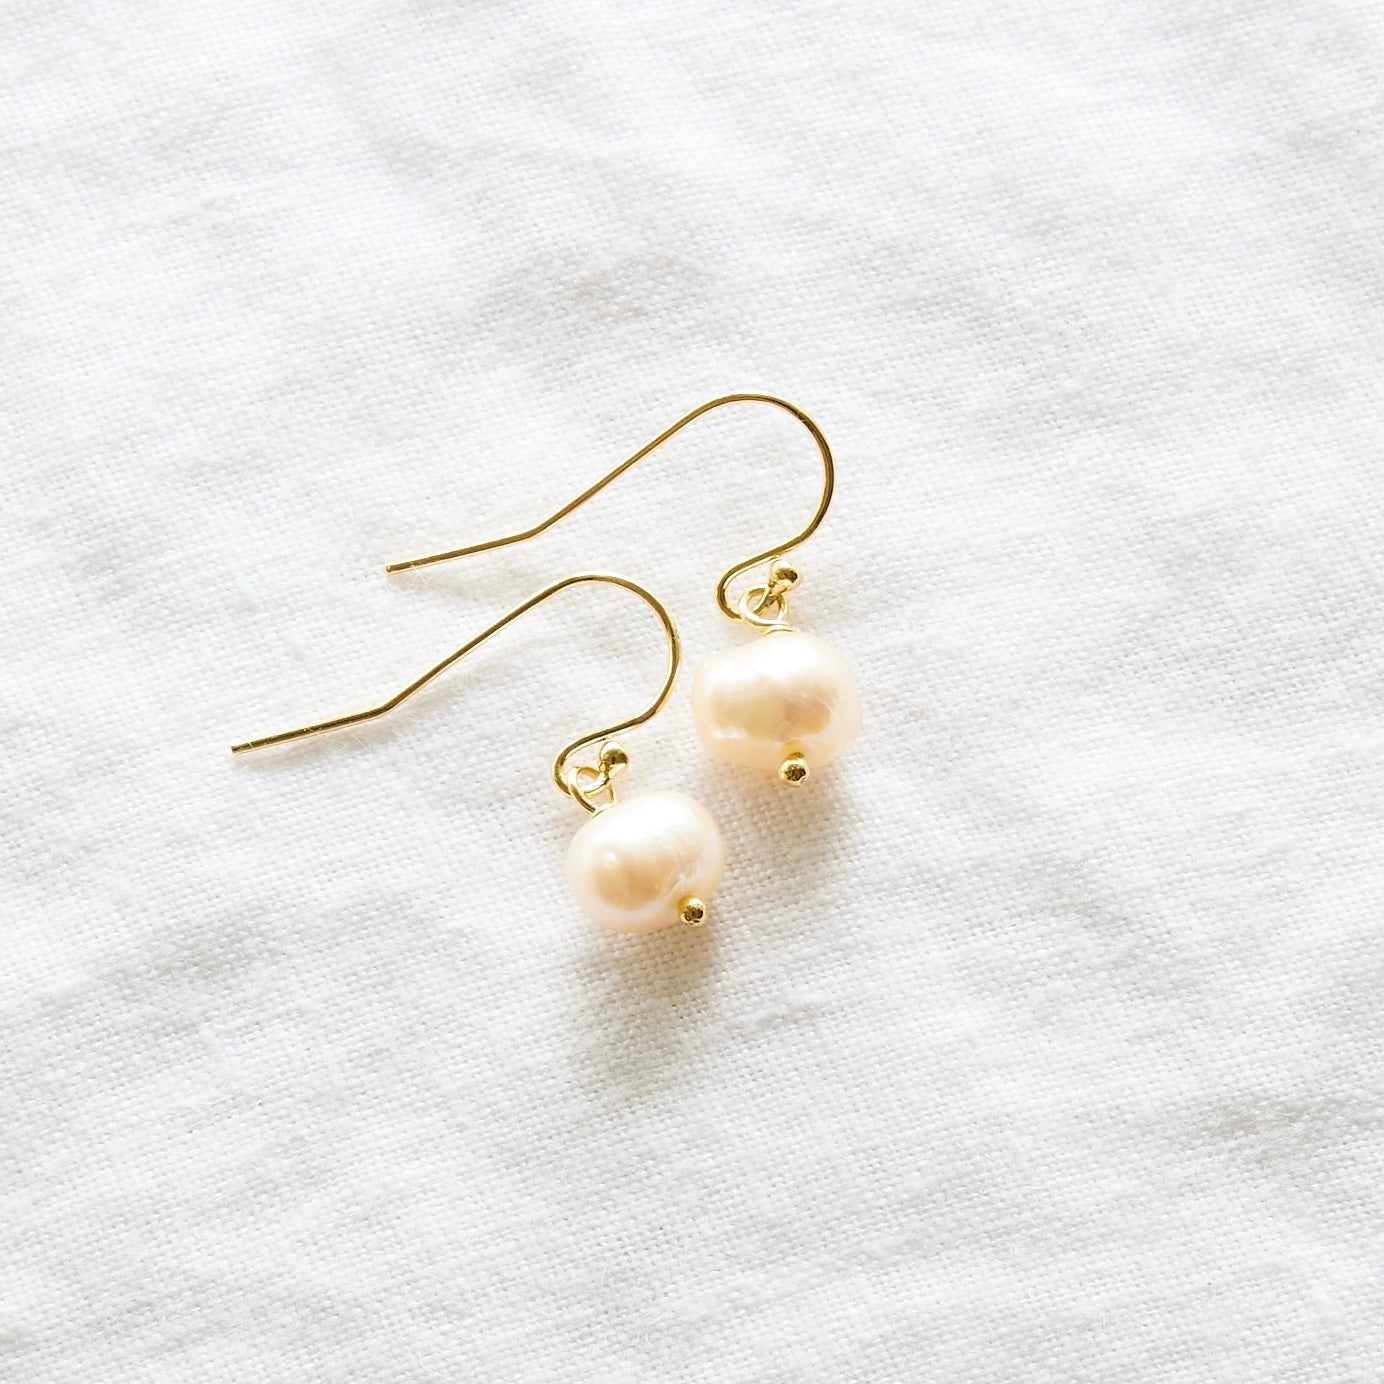 Soft pink freshwater pearls 24k gold plated hook earrings